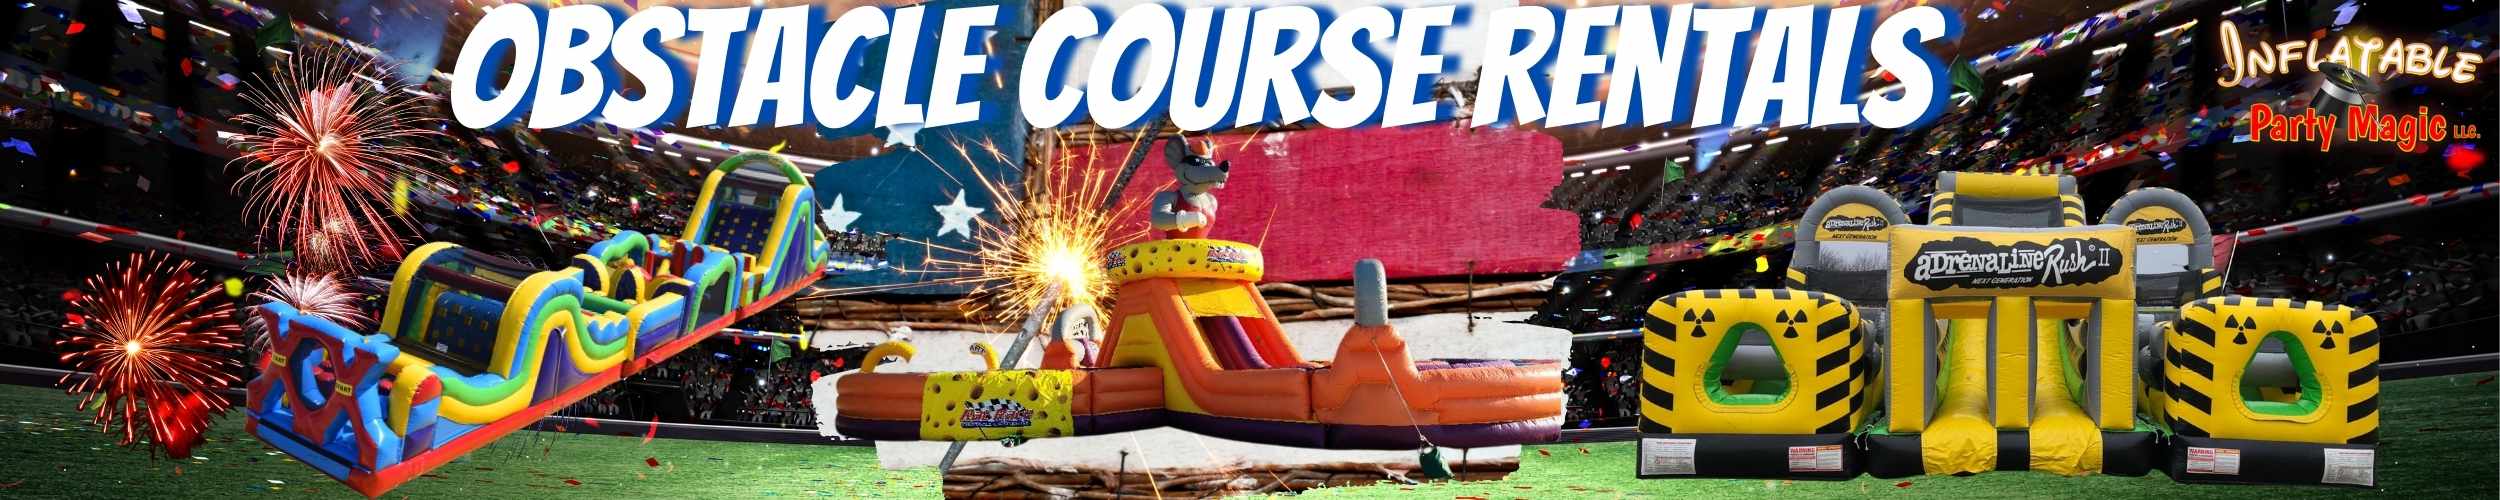 Inflatable Obstacle Course Rentals DFW Tx near me